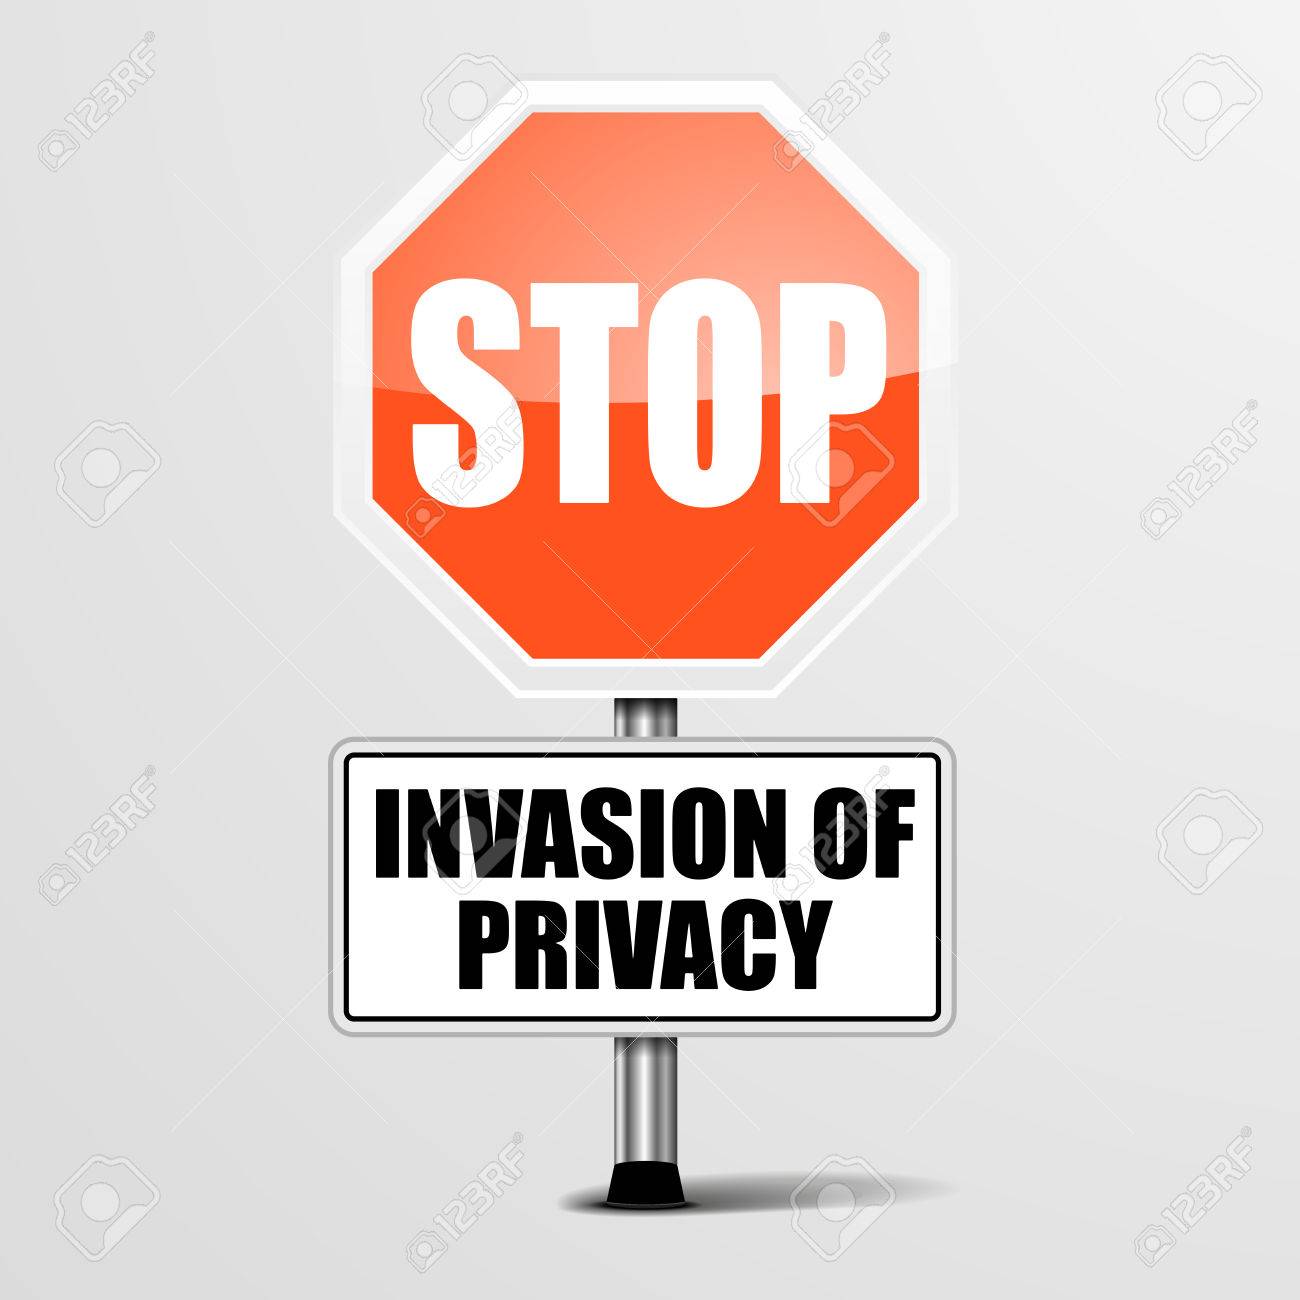 Stop Invasion of Privacy